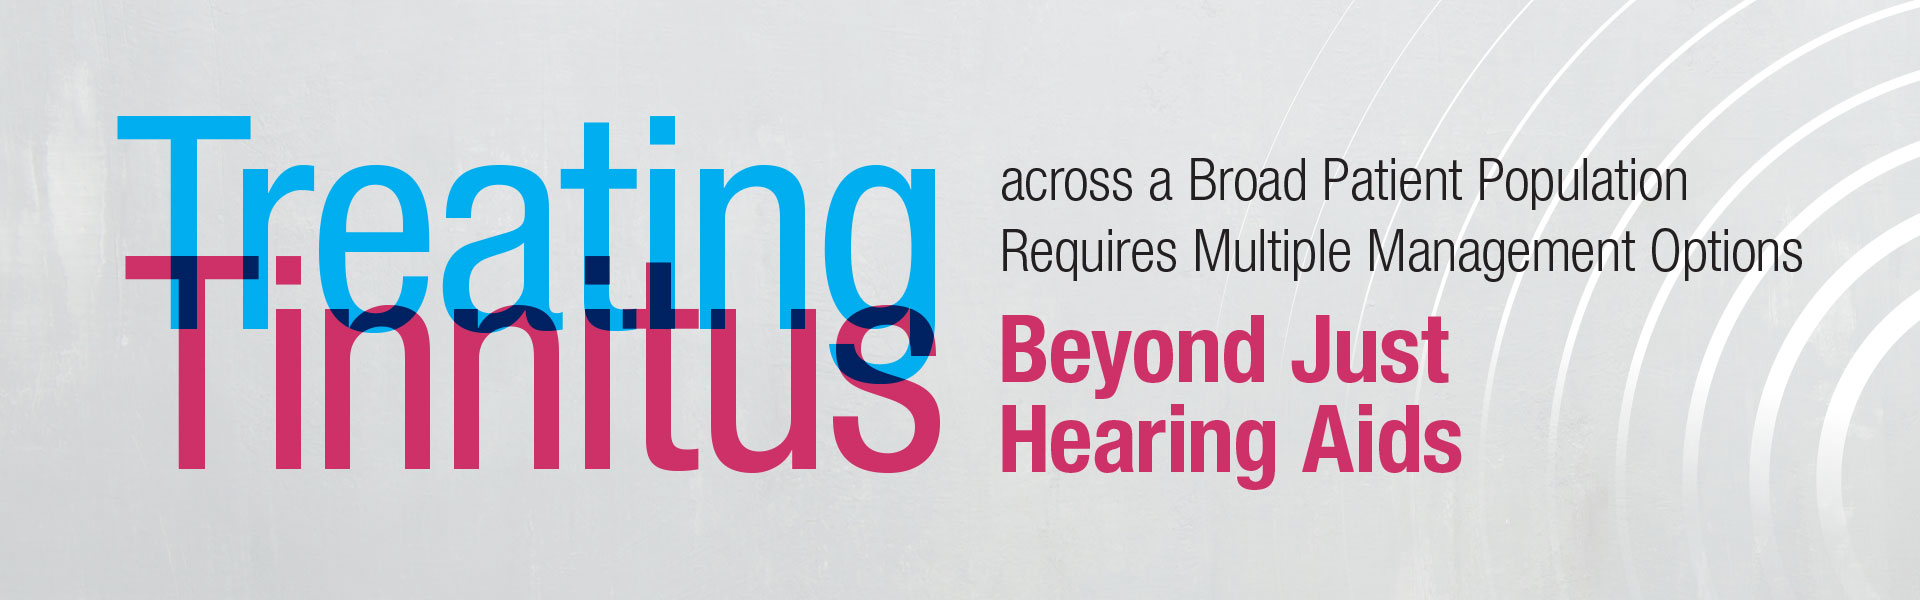 Treating Tinnitus Across a Broad Patient Population Requires Multiple Management Options Beyond Just Hearing Aids